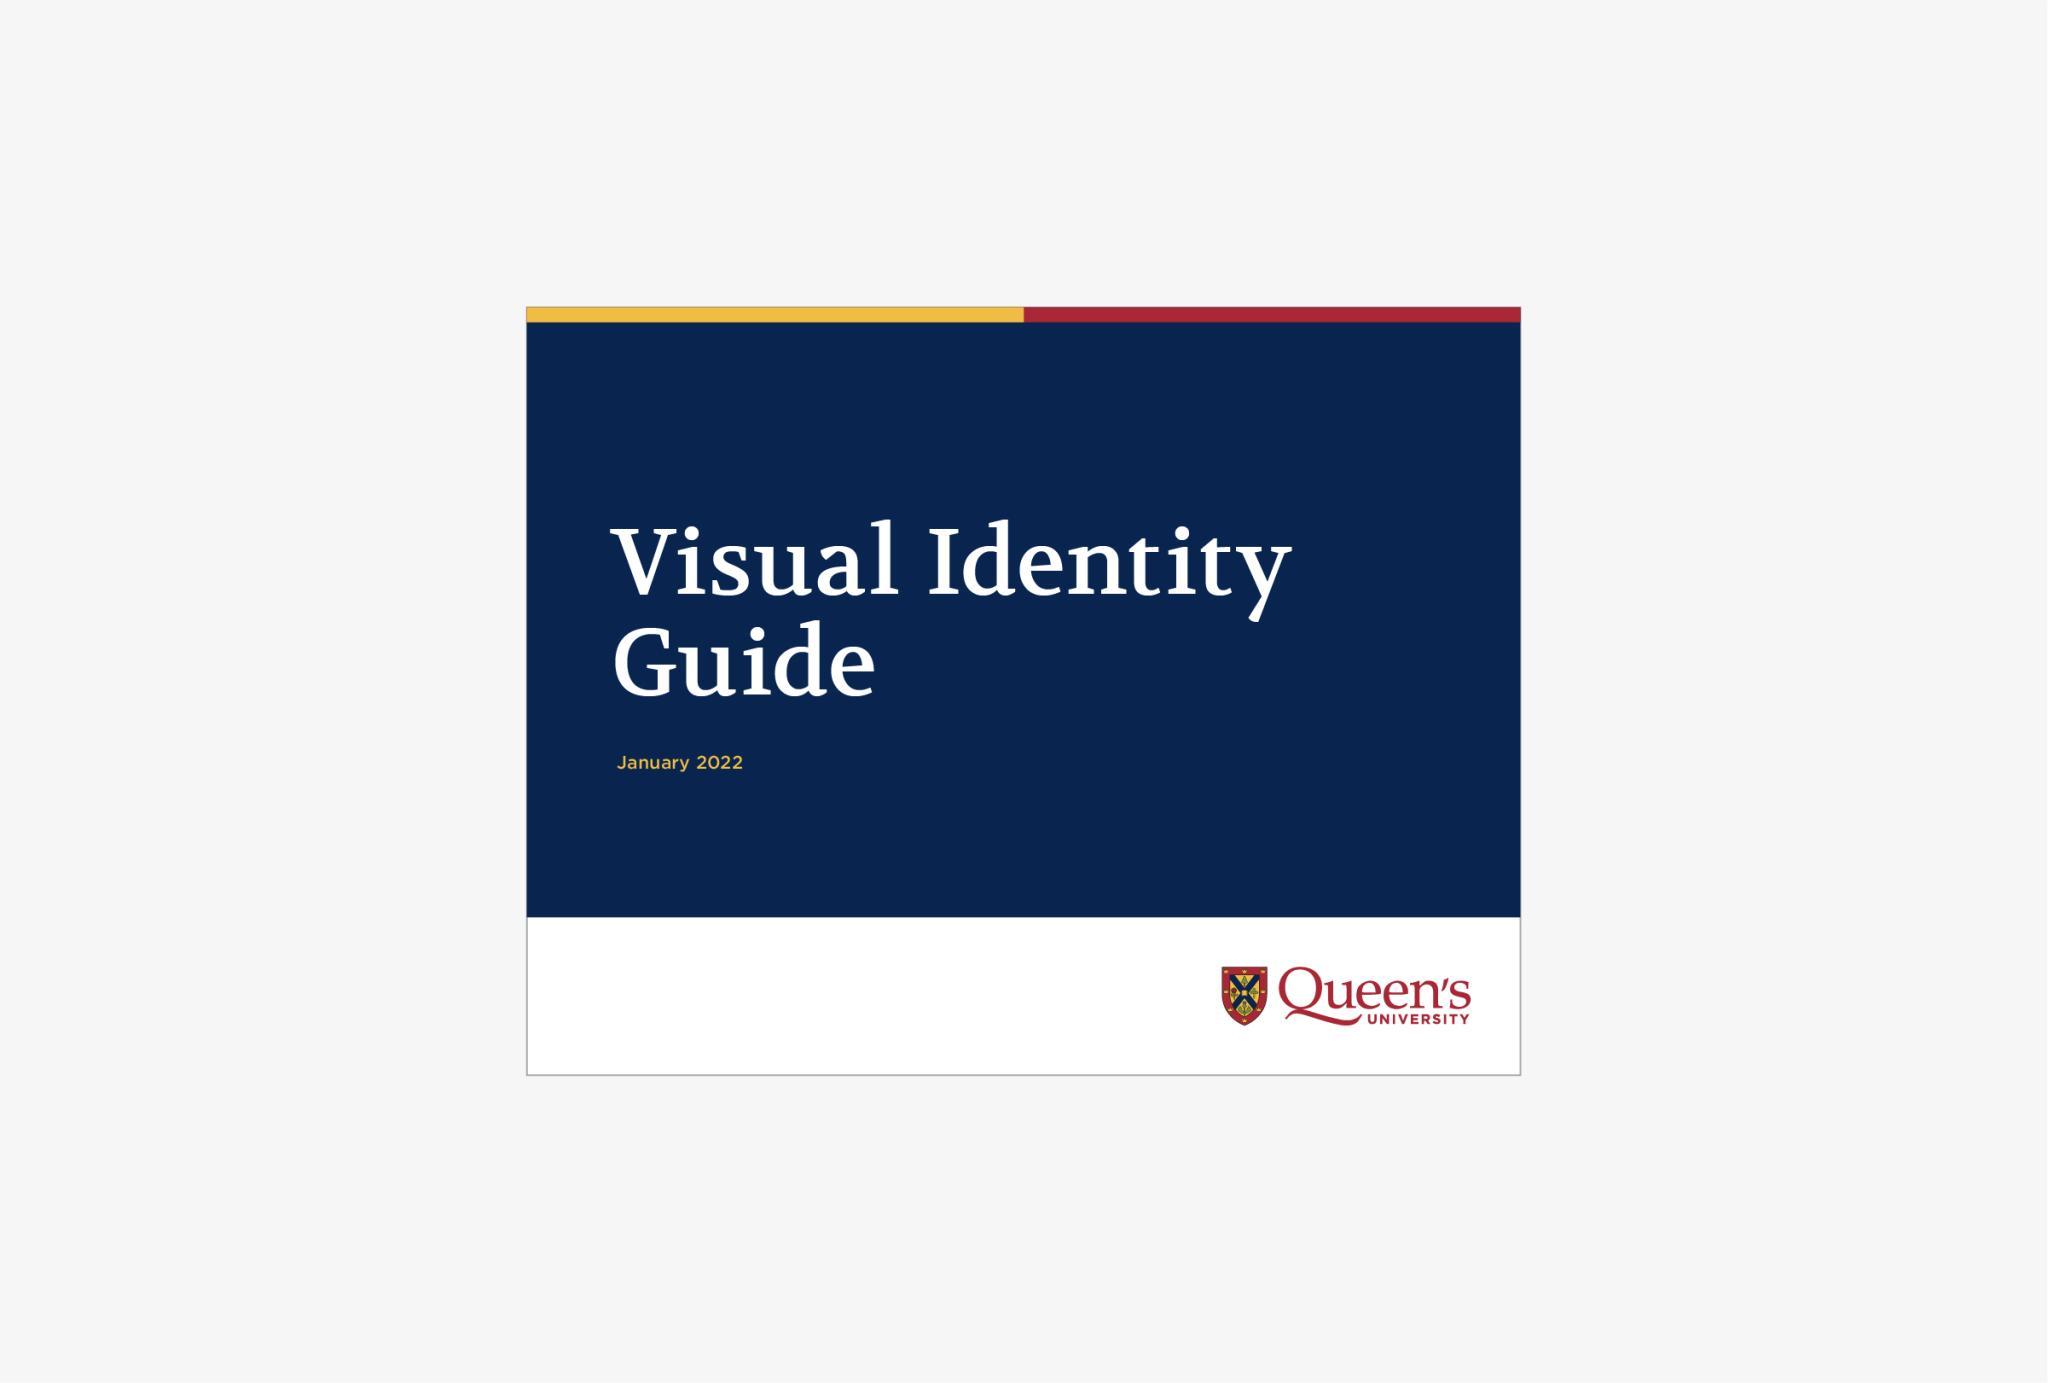 Queen's University visual identity guide 